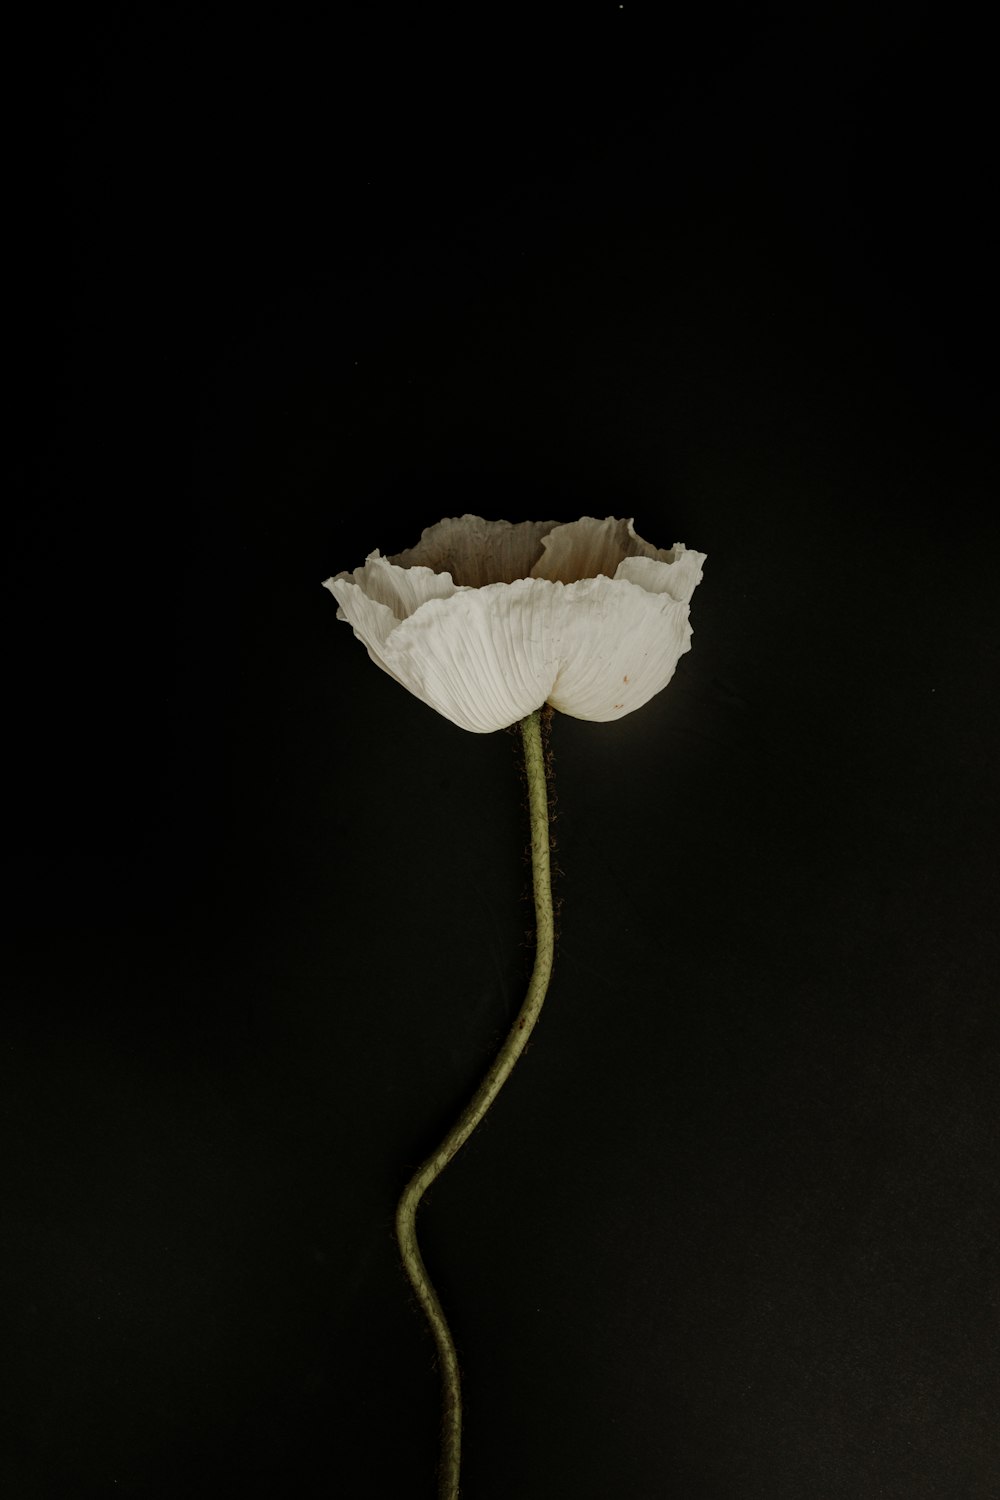 white flower with black background